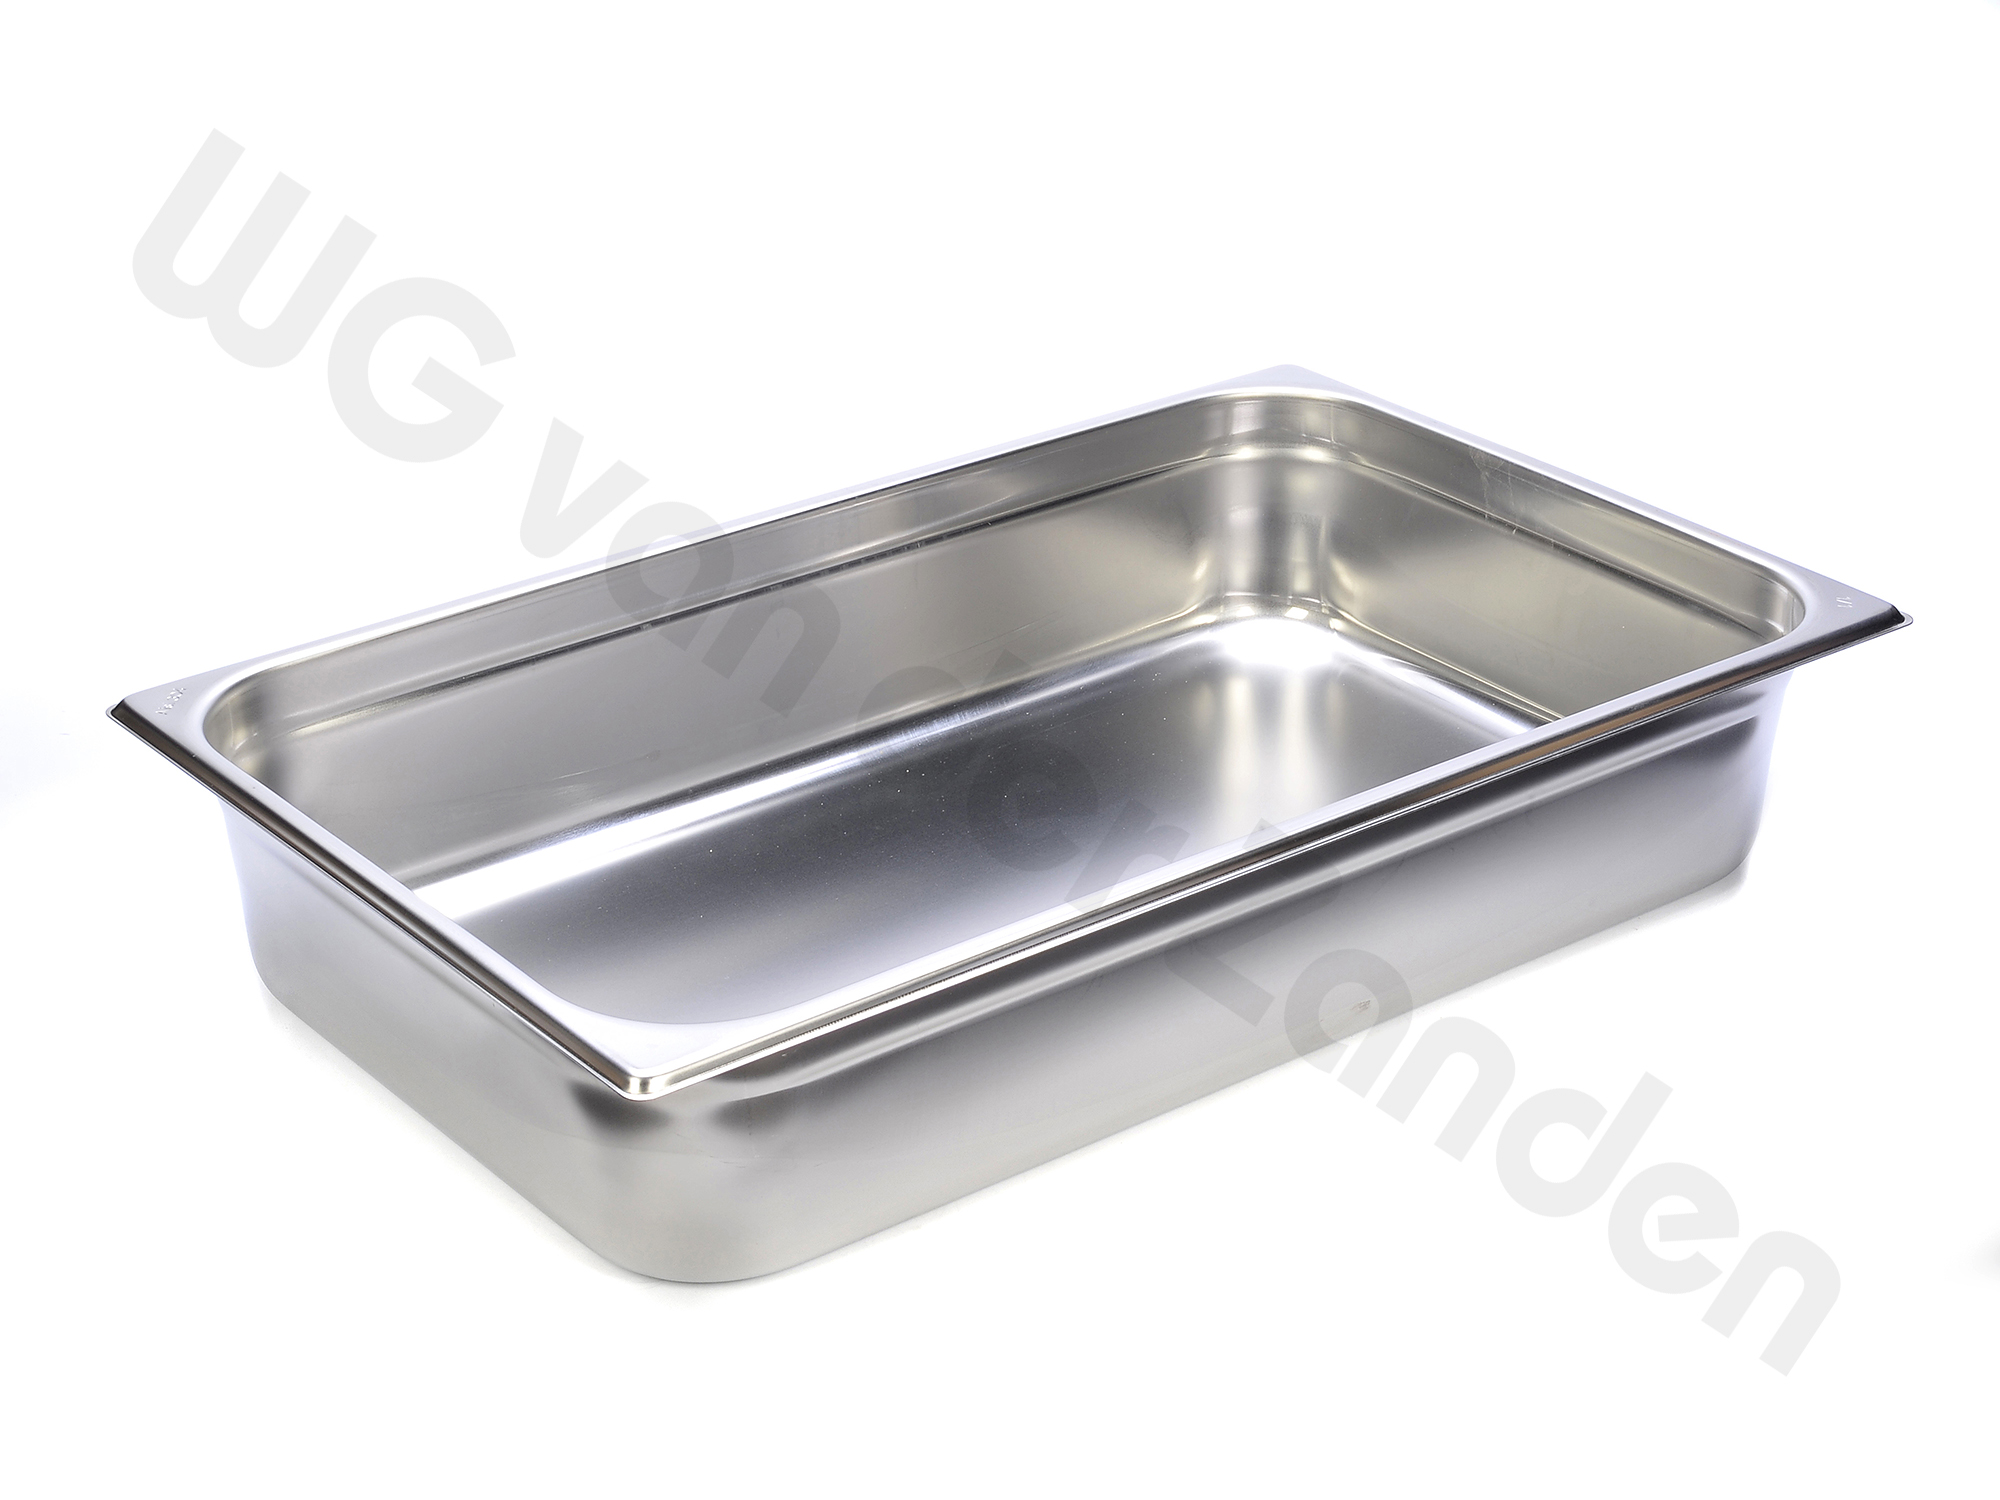 257903 GASTRONORM PAN S/S 1/2 X 15CM